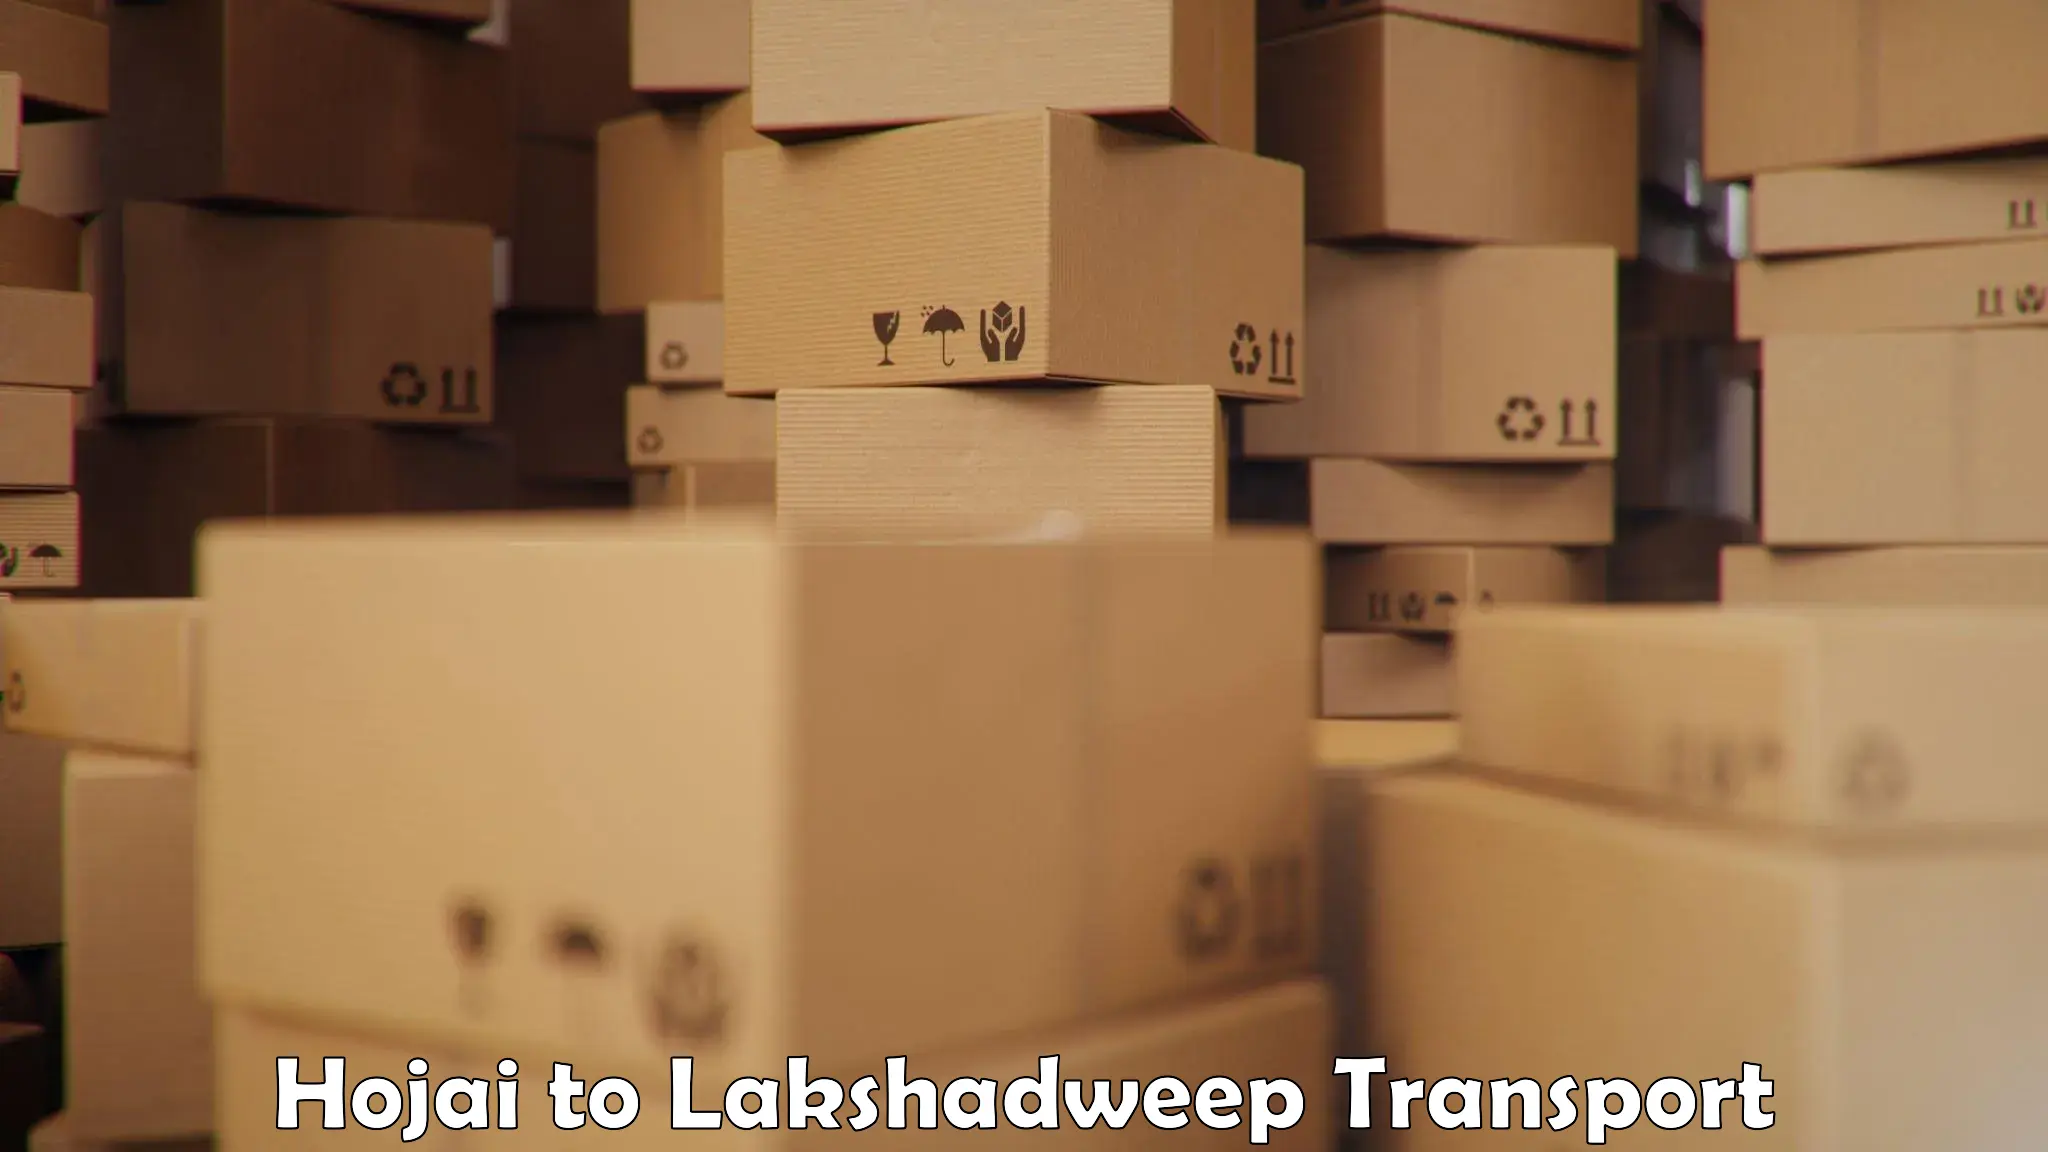 Transport bike from one state to another Hojai to Lakshadweep